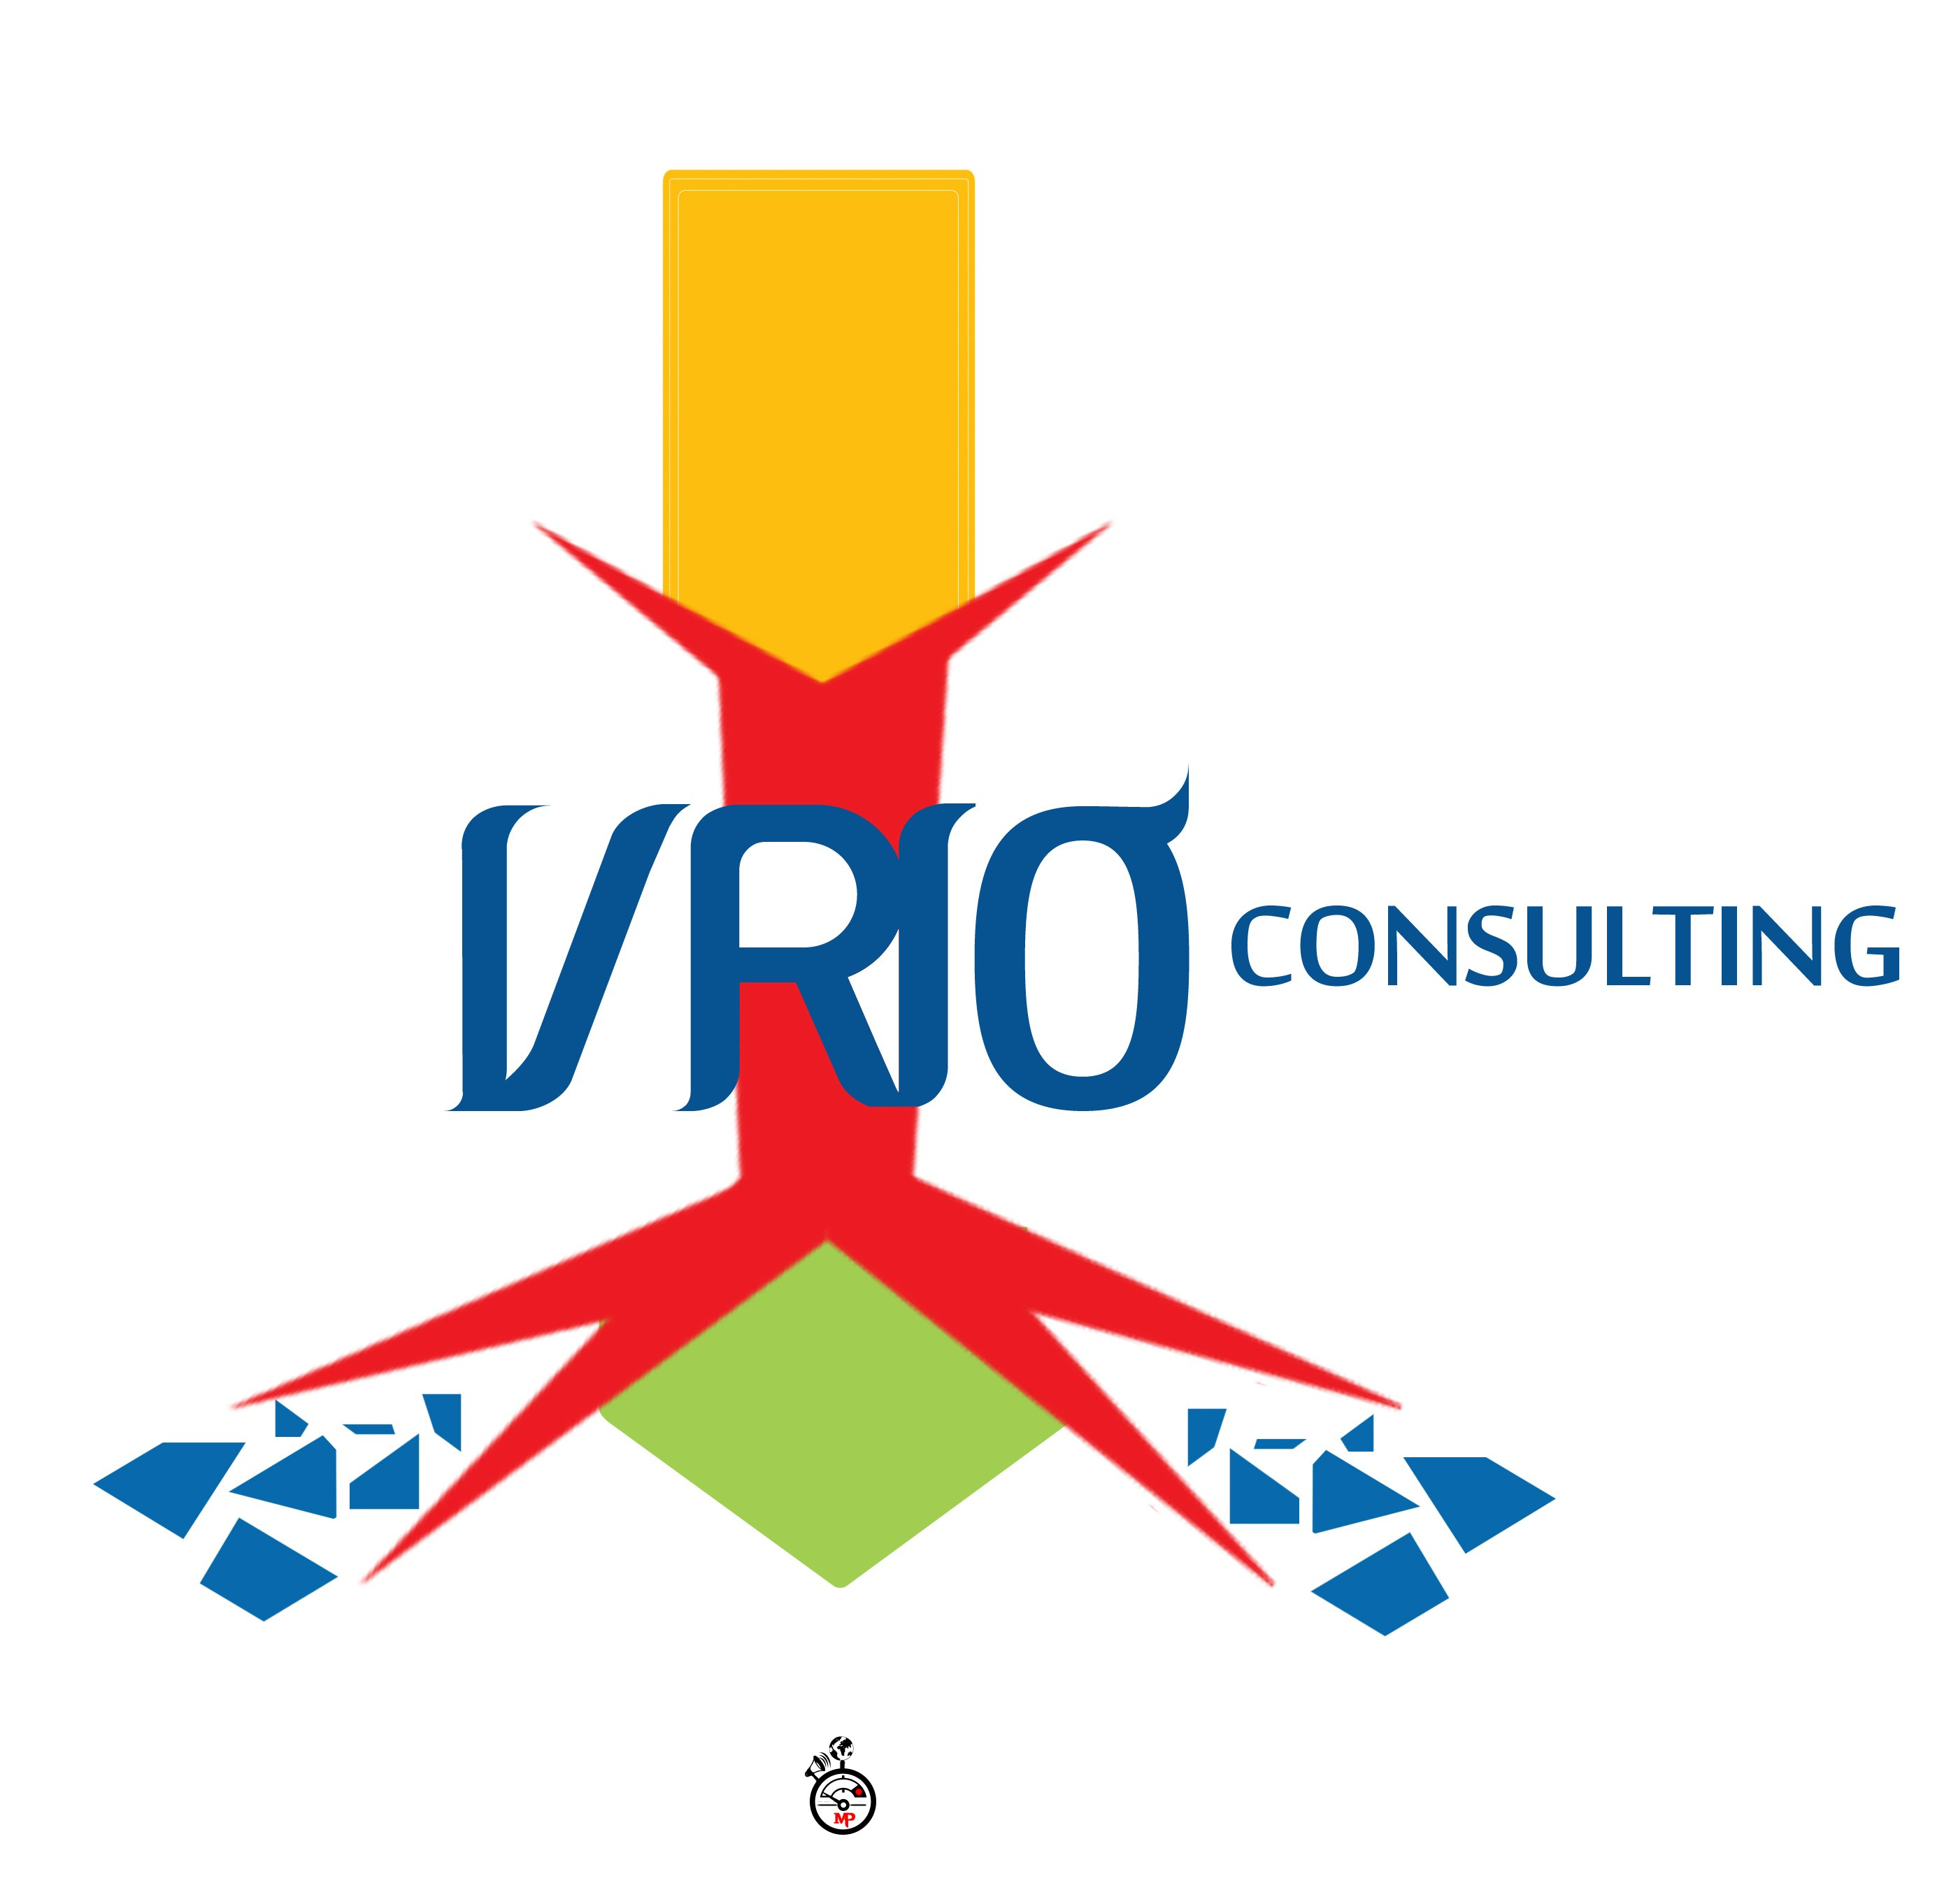 Consulting Co. Logo